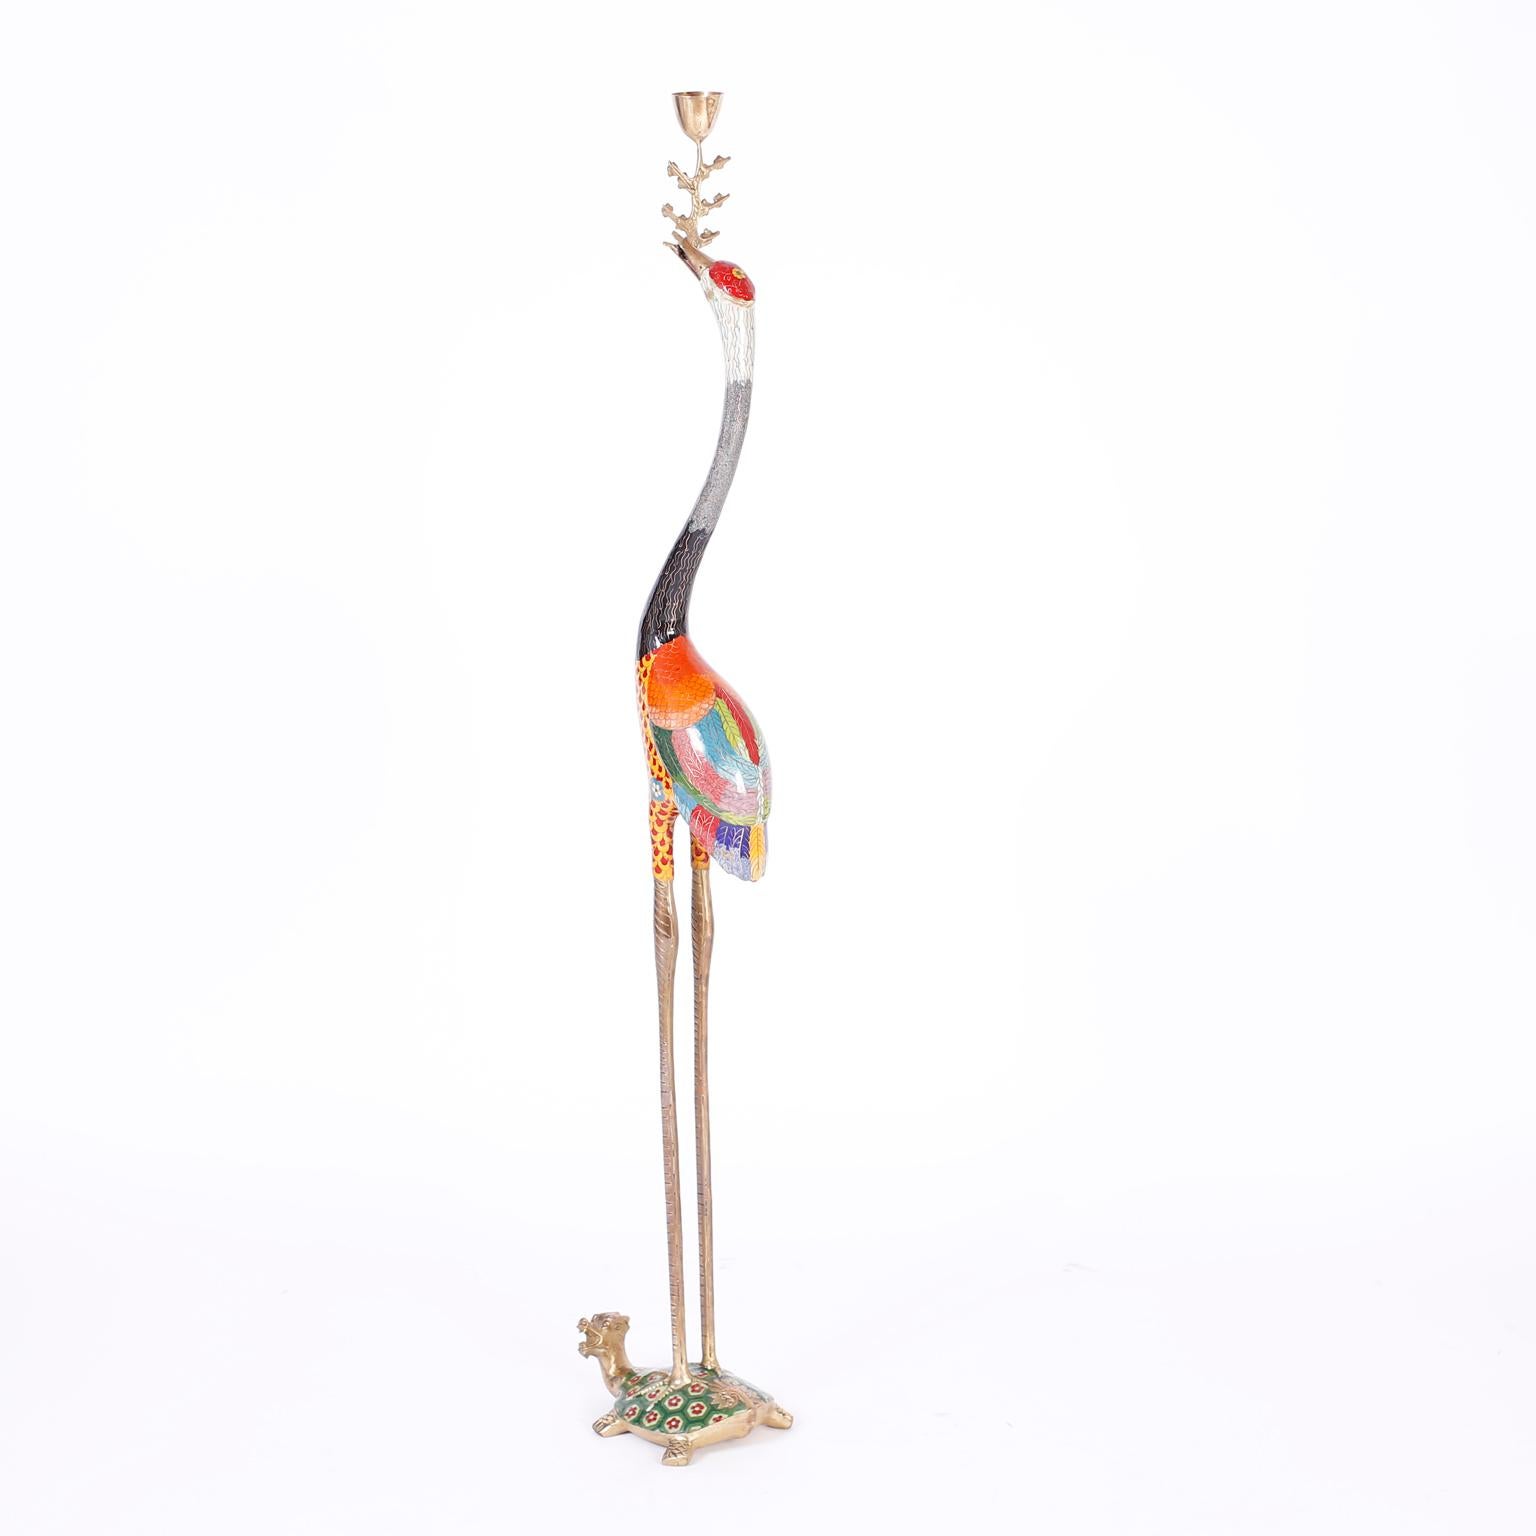 Cloissoné Tall Pair of Chinese Cloisonné Cranes or Bird Candle Stands